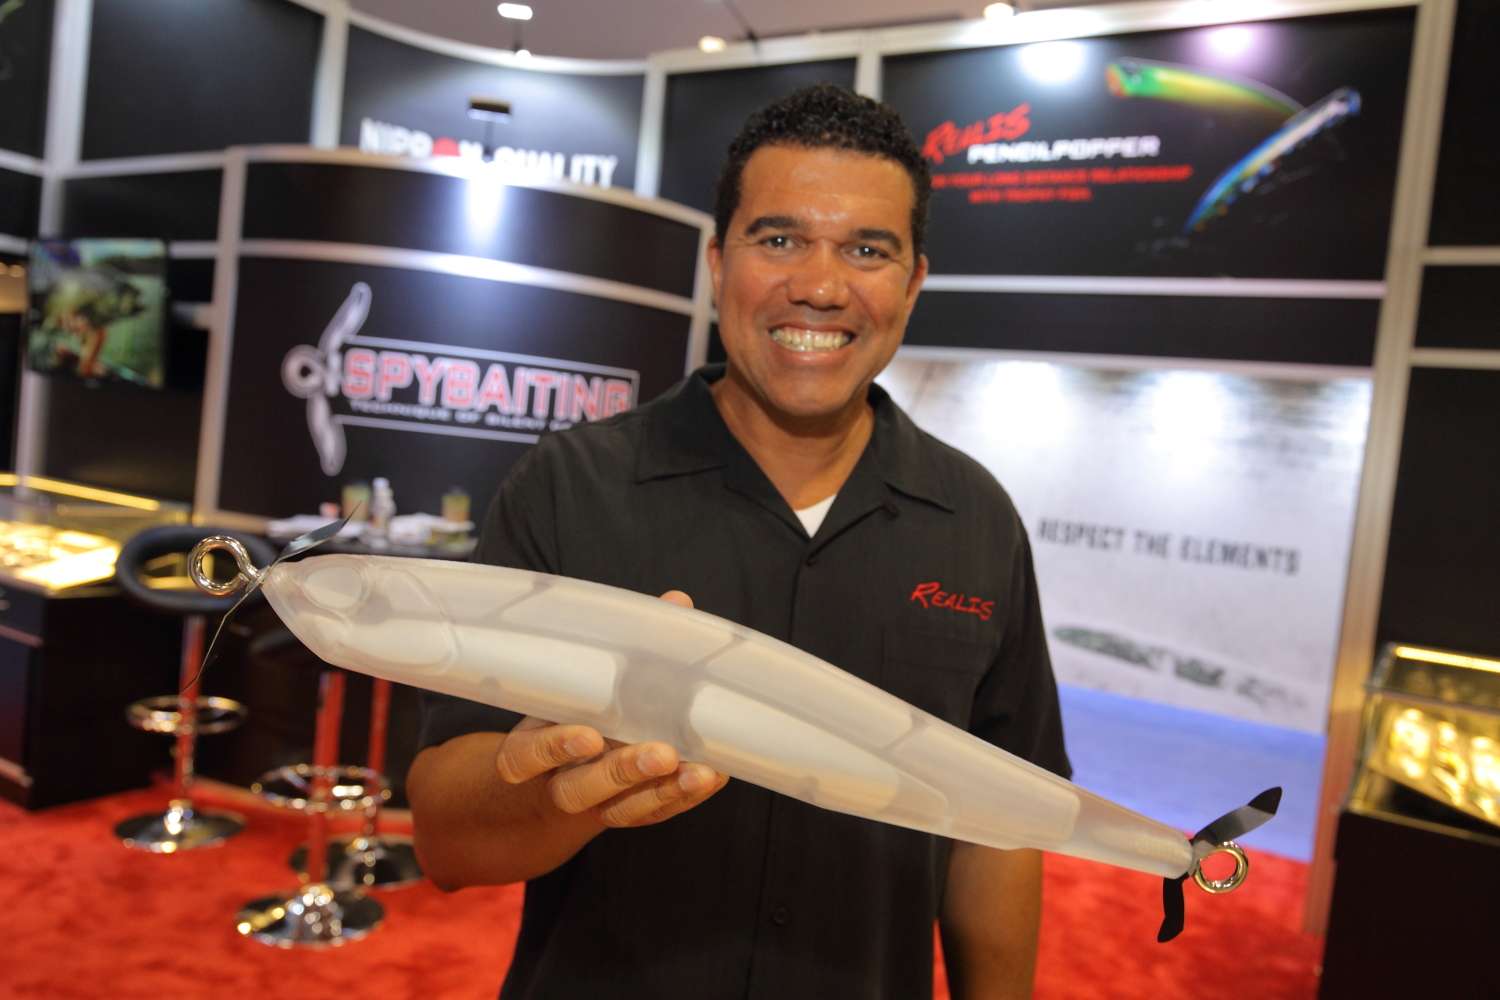 David Swendseid of Duo holds a display version of Spybait.